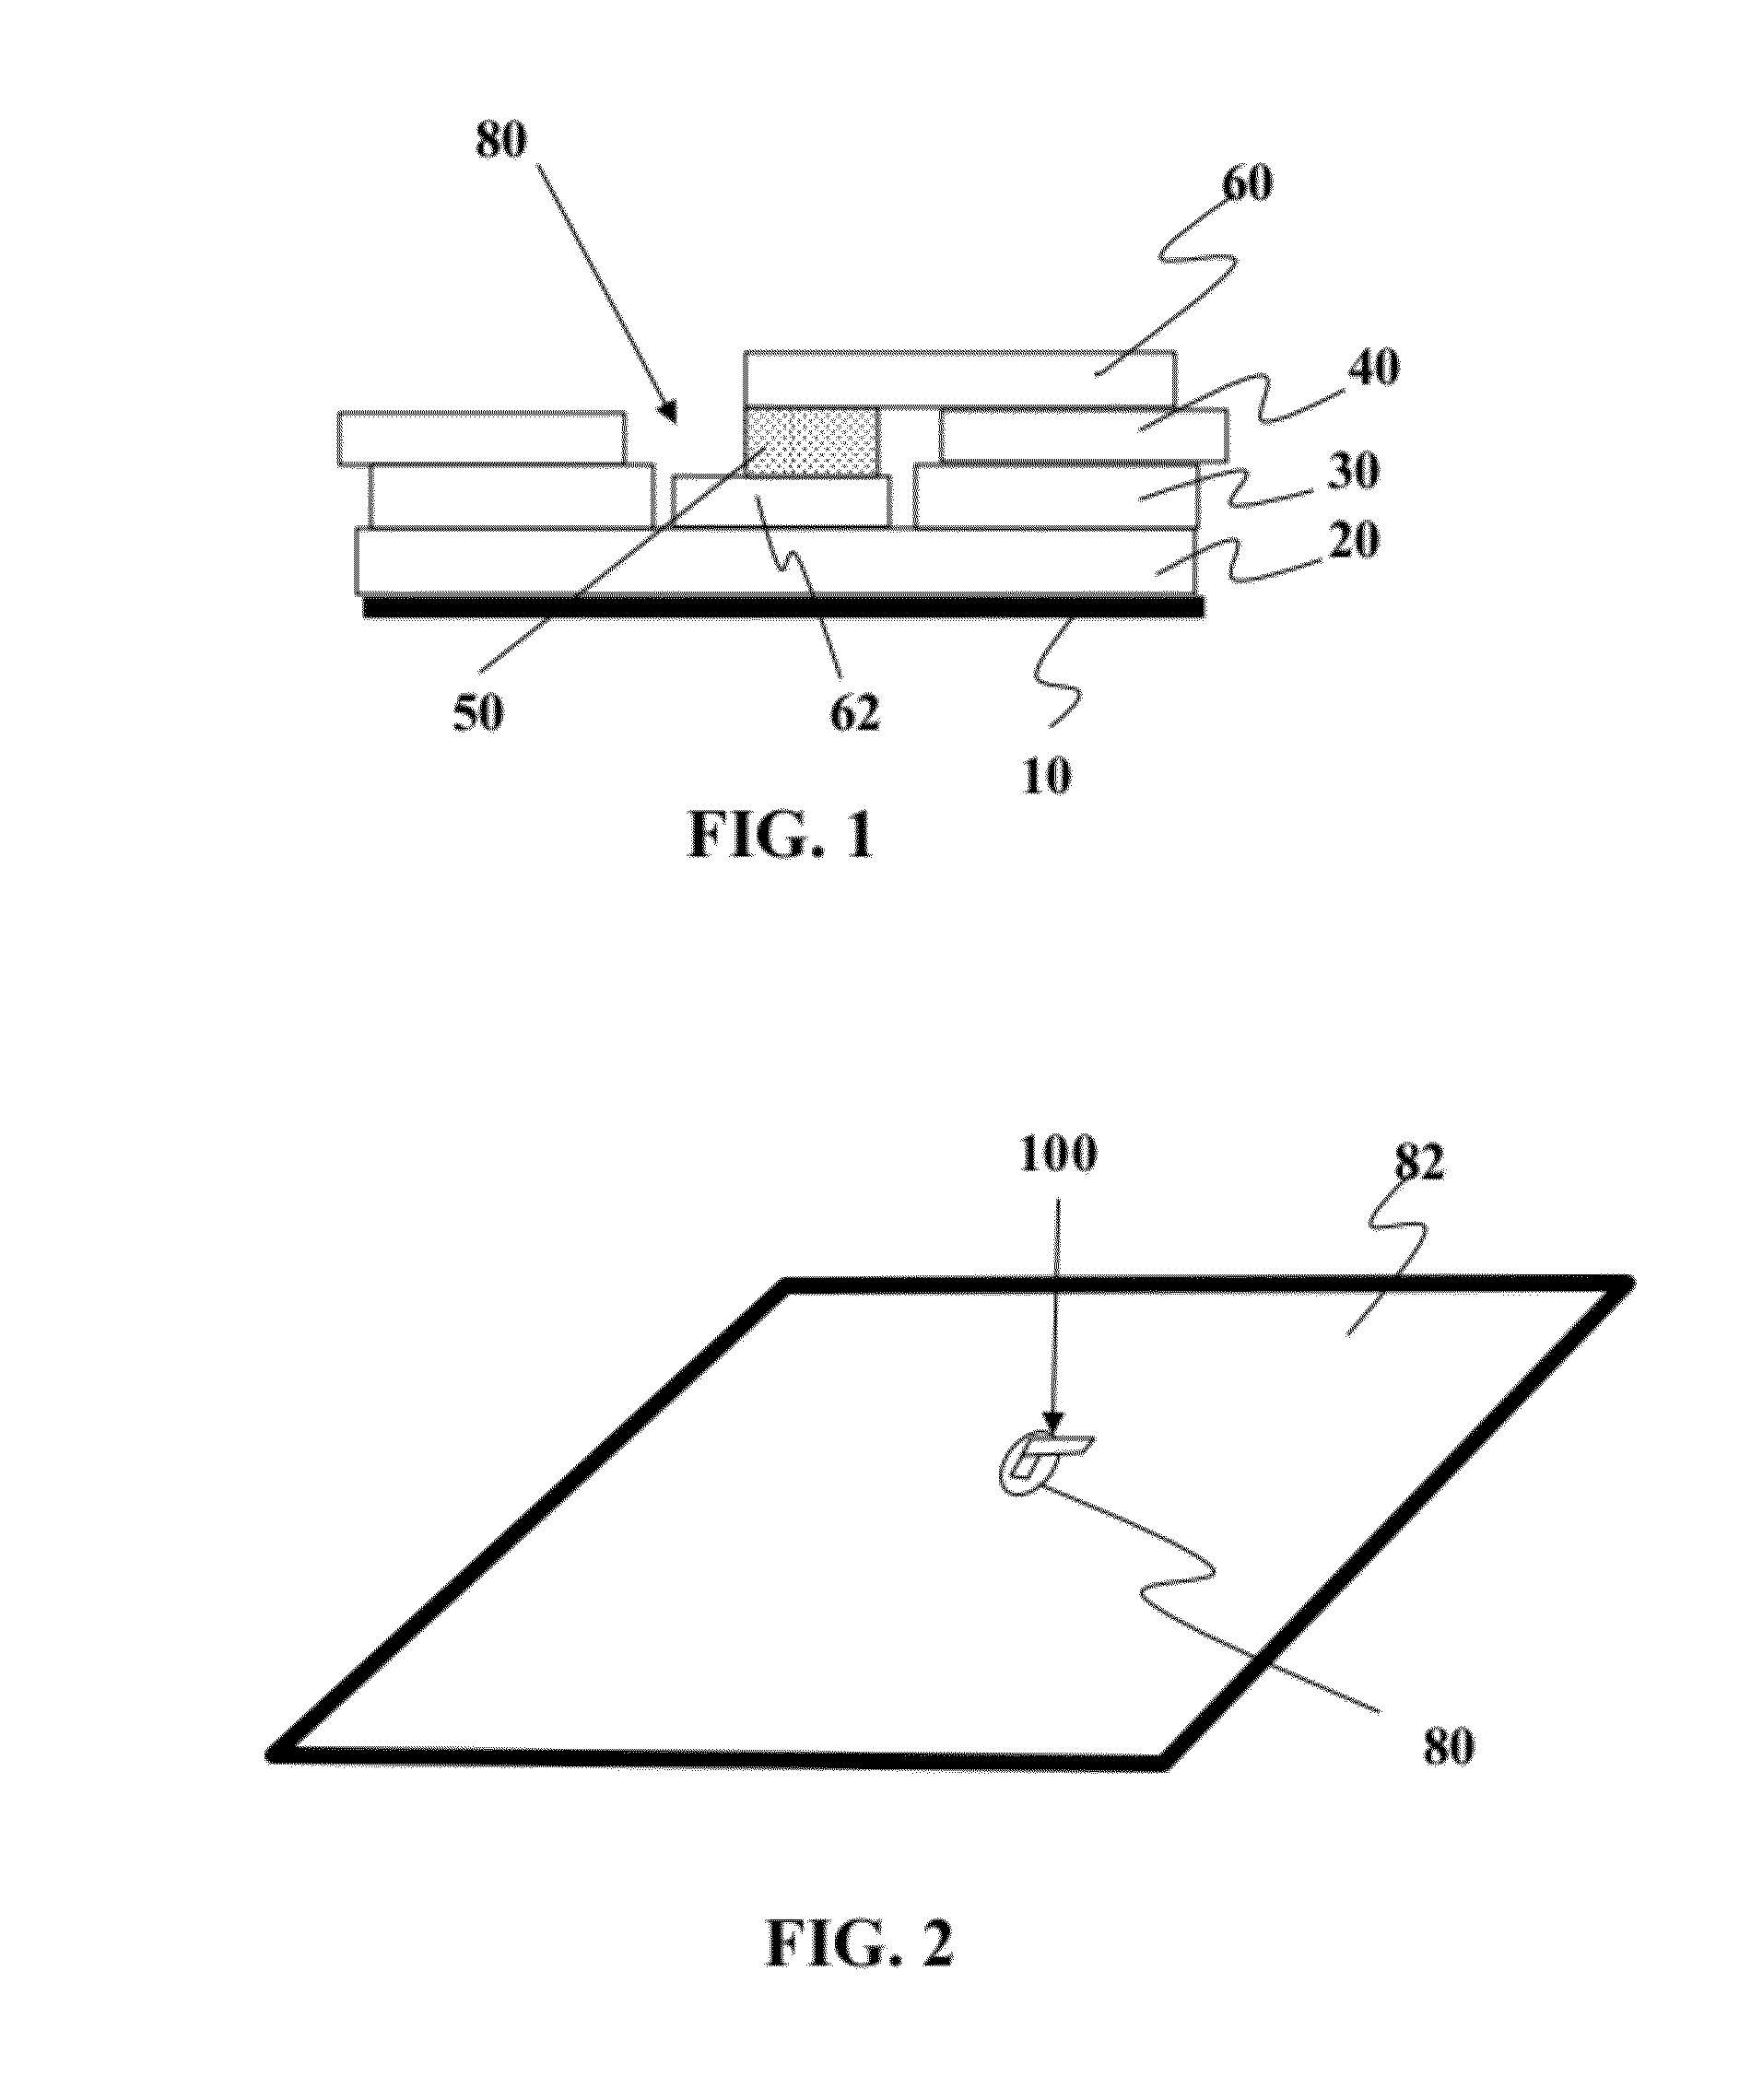 Assembly for electrical breakdown protection for high current, non-elongate solar cells with electrically conductive substrates